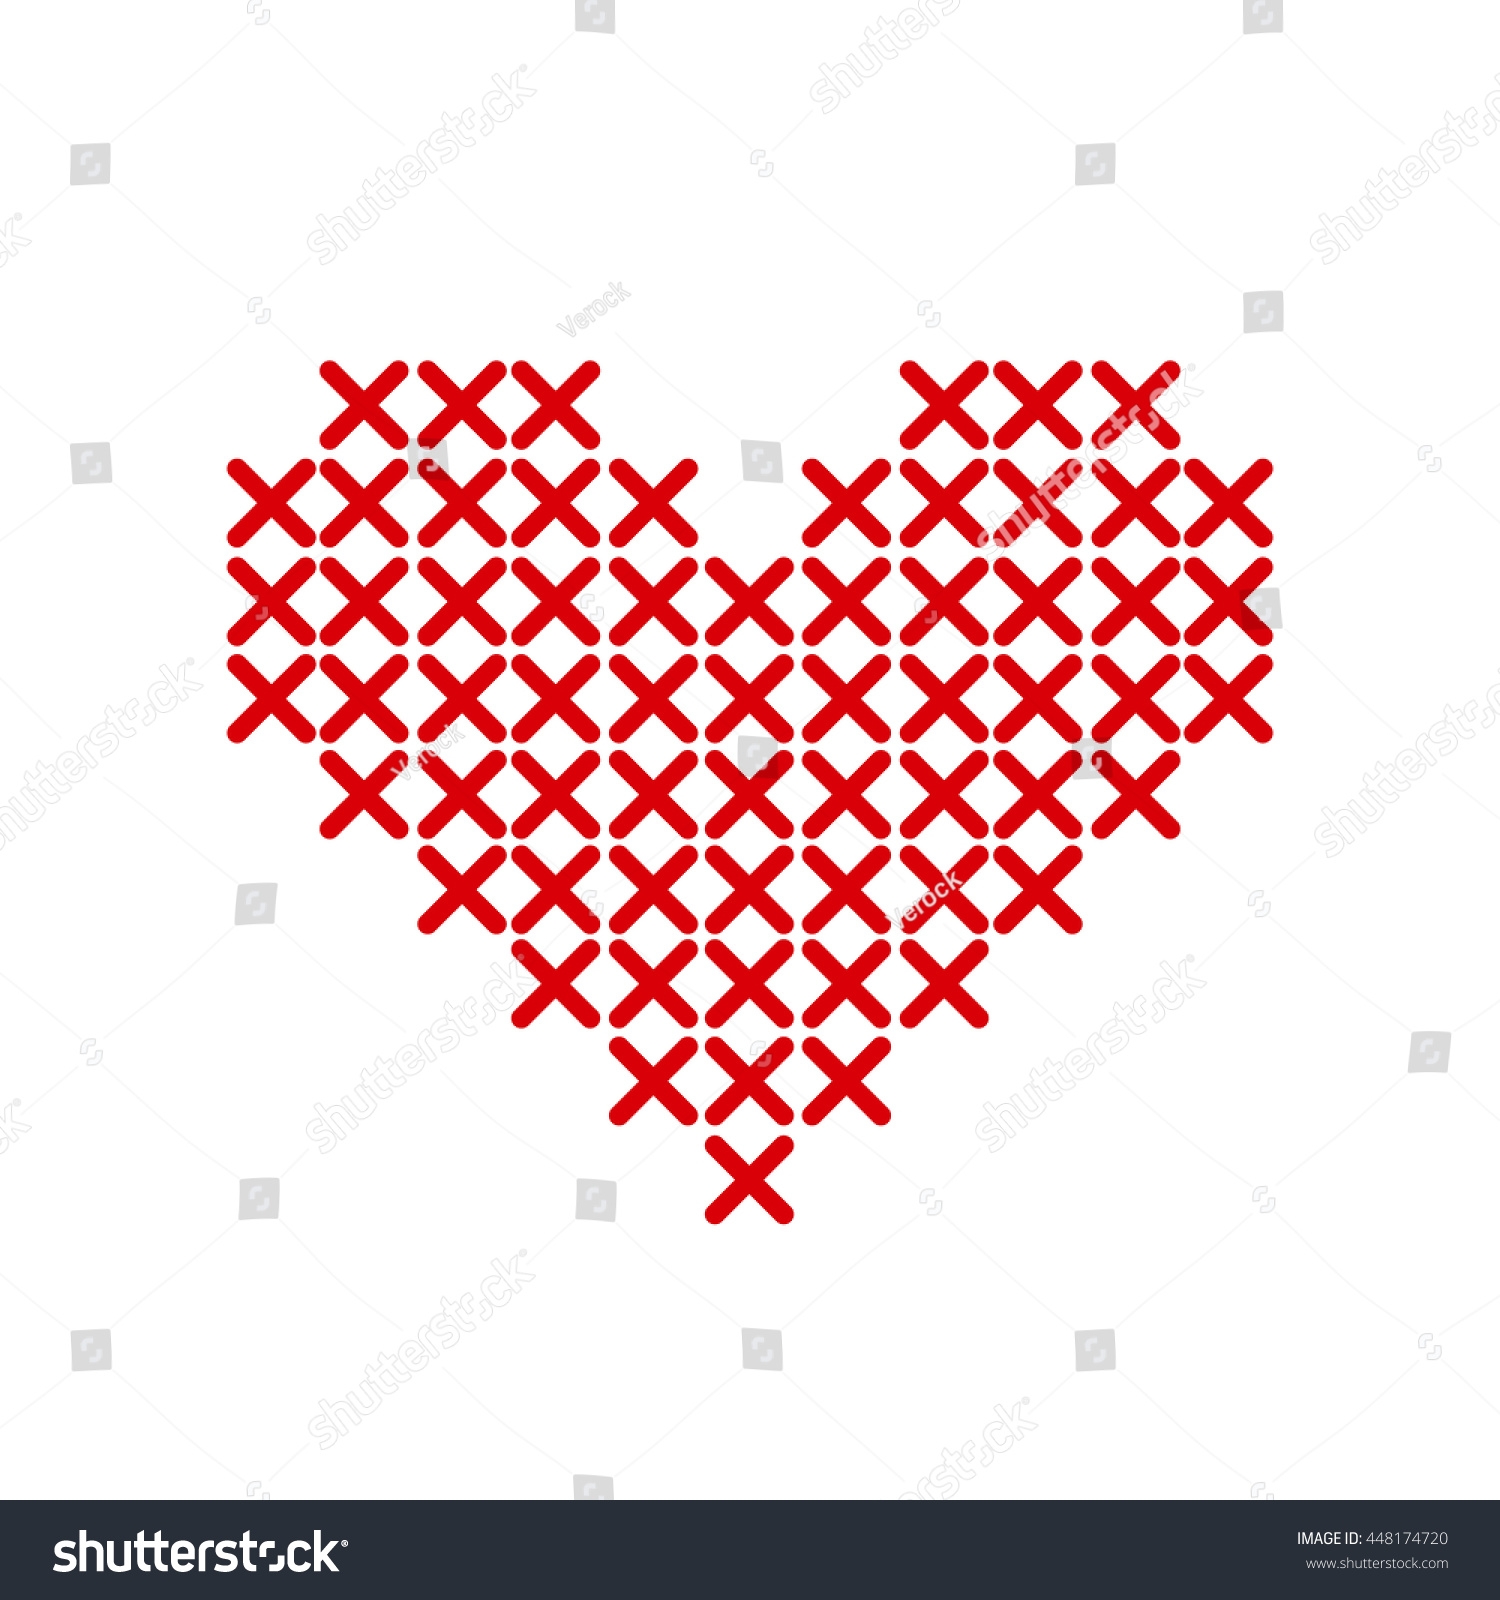 3 299 Cross Stitch Heart Royalty Free Photos And Stock Images Shutterstock